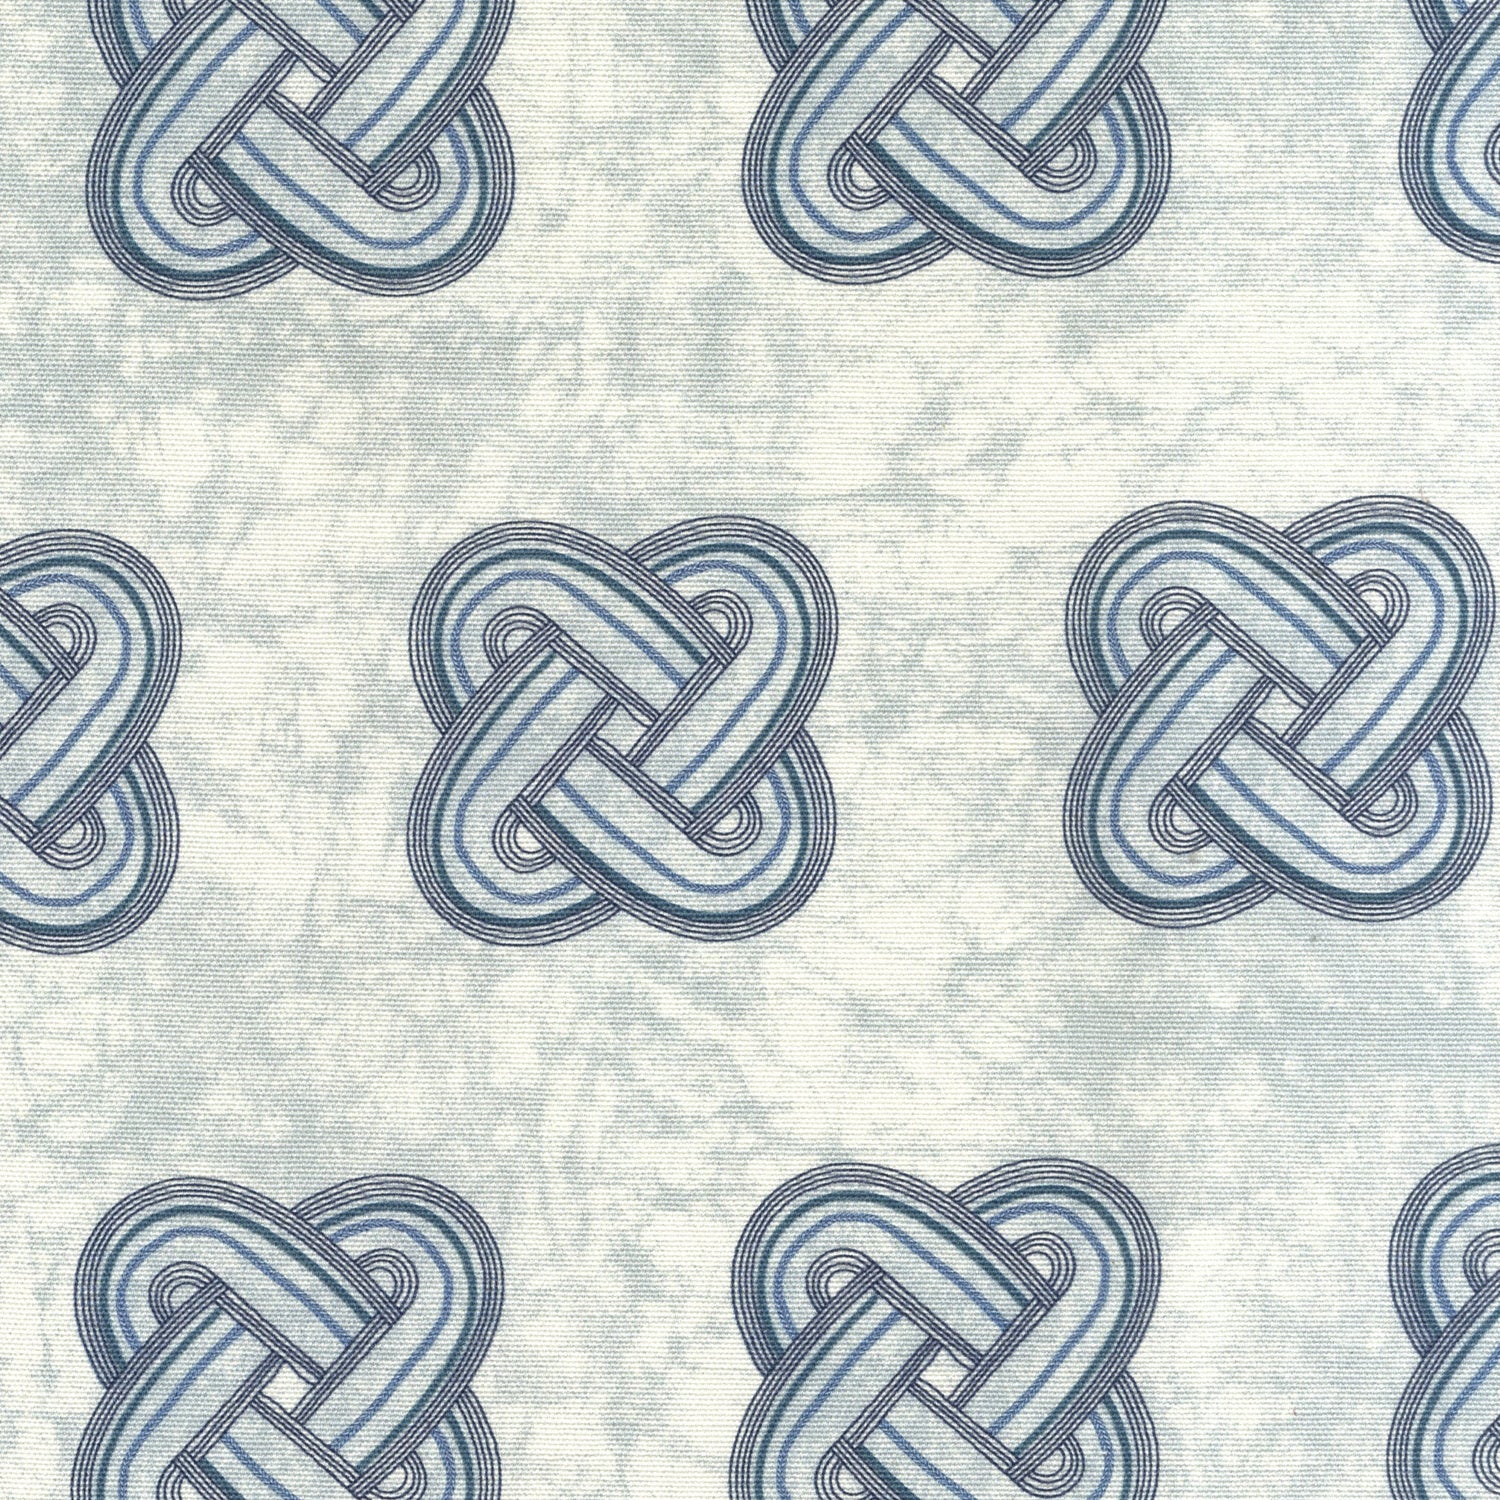 Detail of fabric in a repeating knot print in gray and navy on a light gray field.